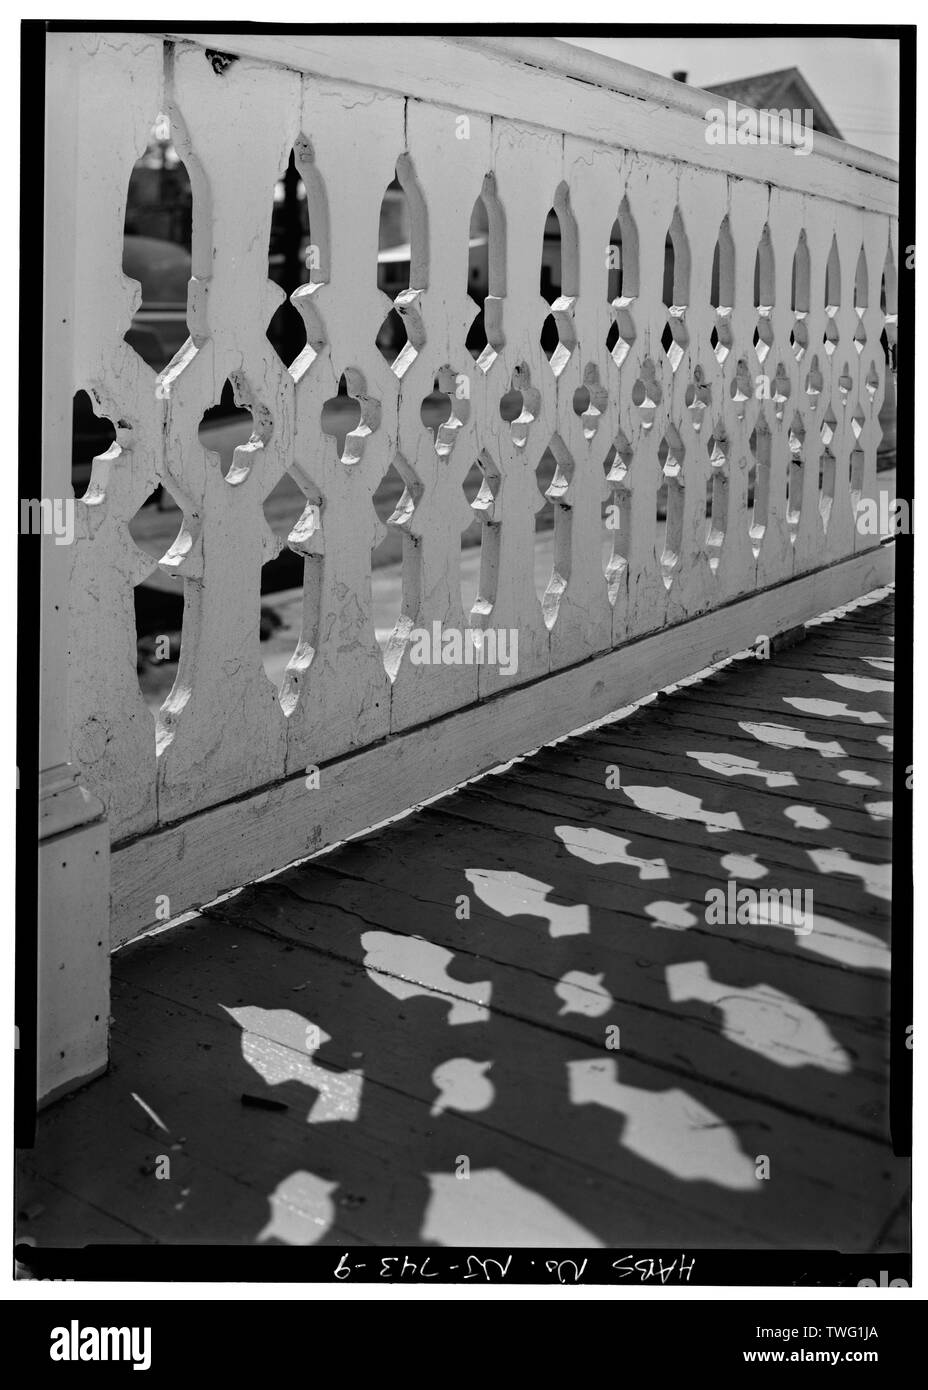 Veranda, Detail der Balustrade - Chalfonte Hotel, Howard Street und Sewell Avenue, Cape May, Cape May County, New Jersey Stockfoto